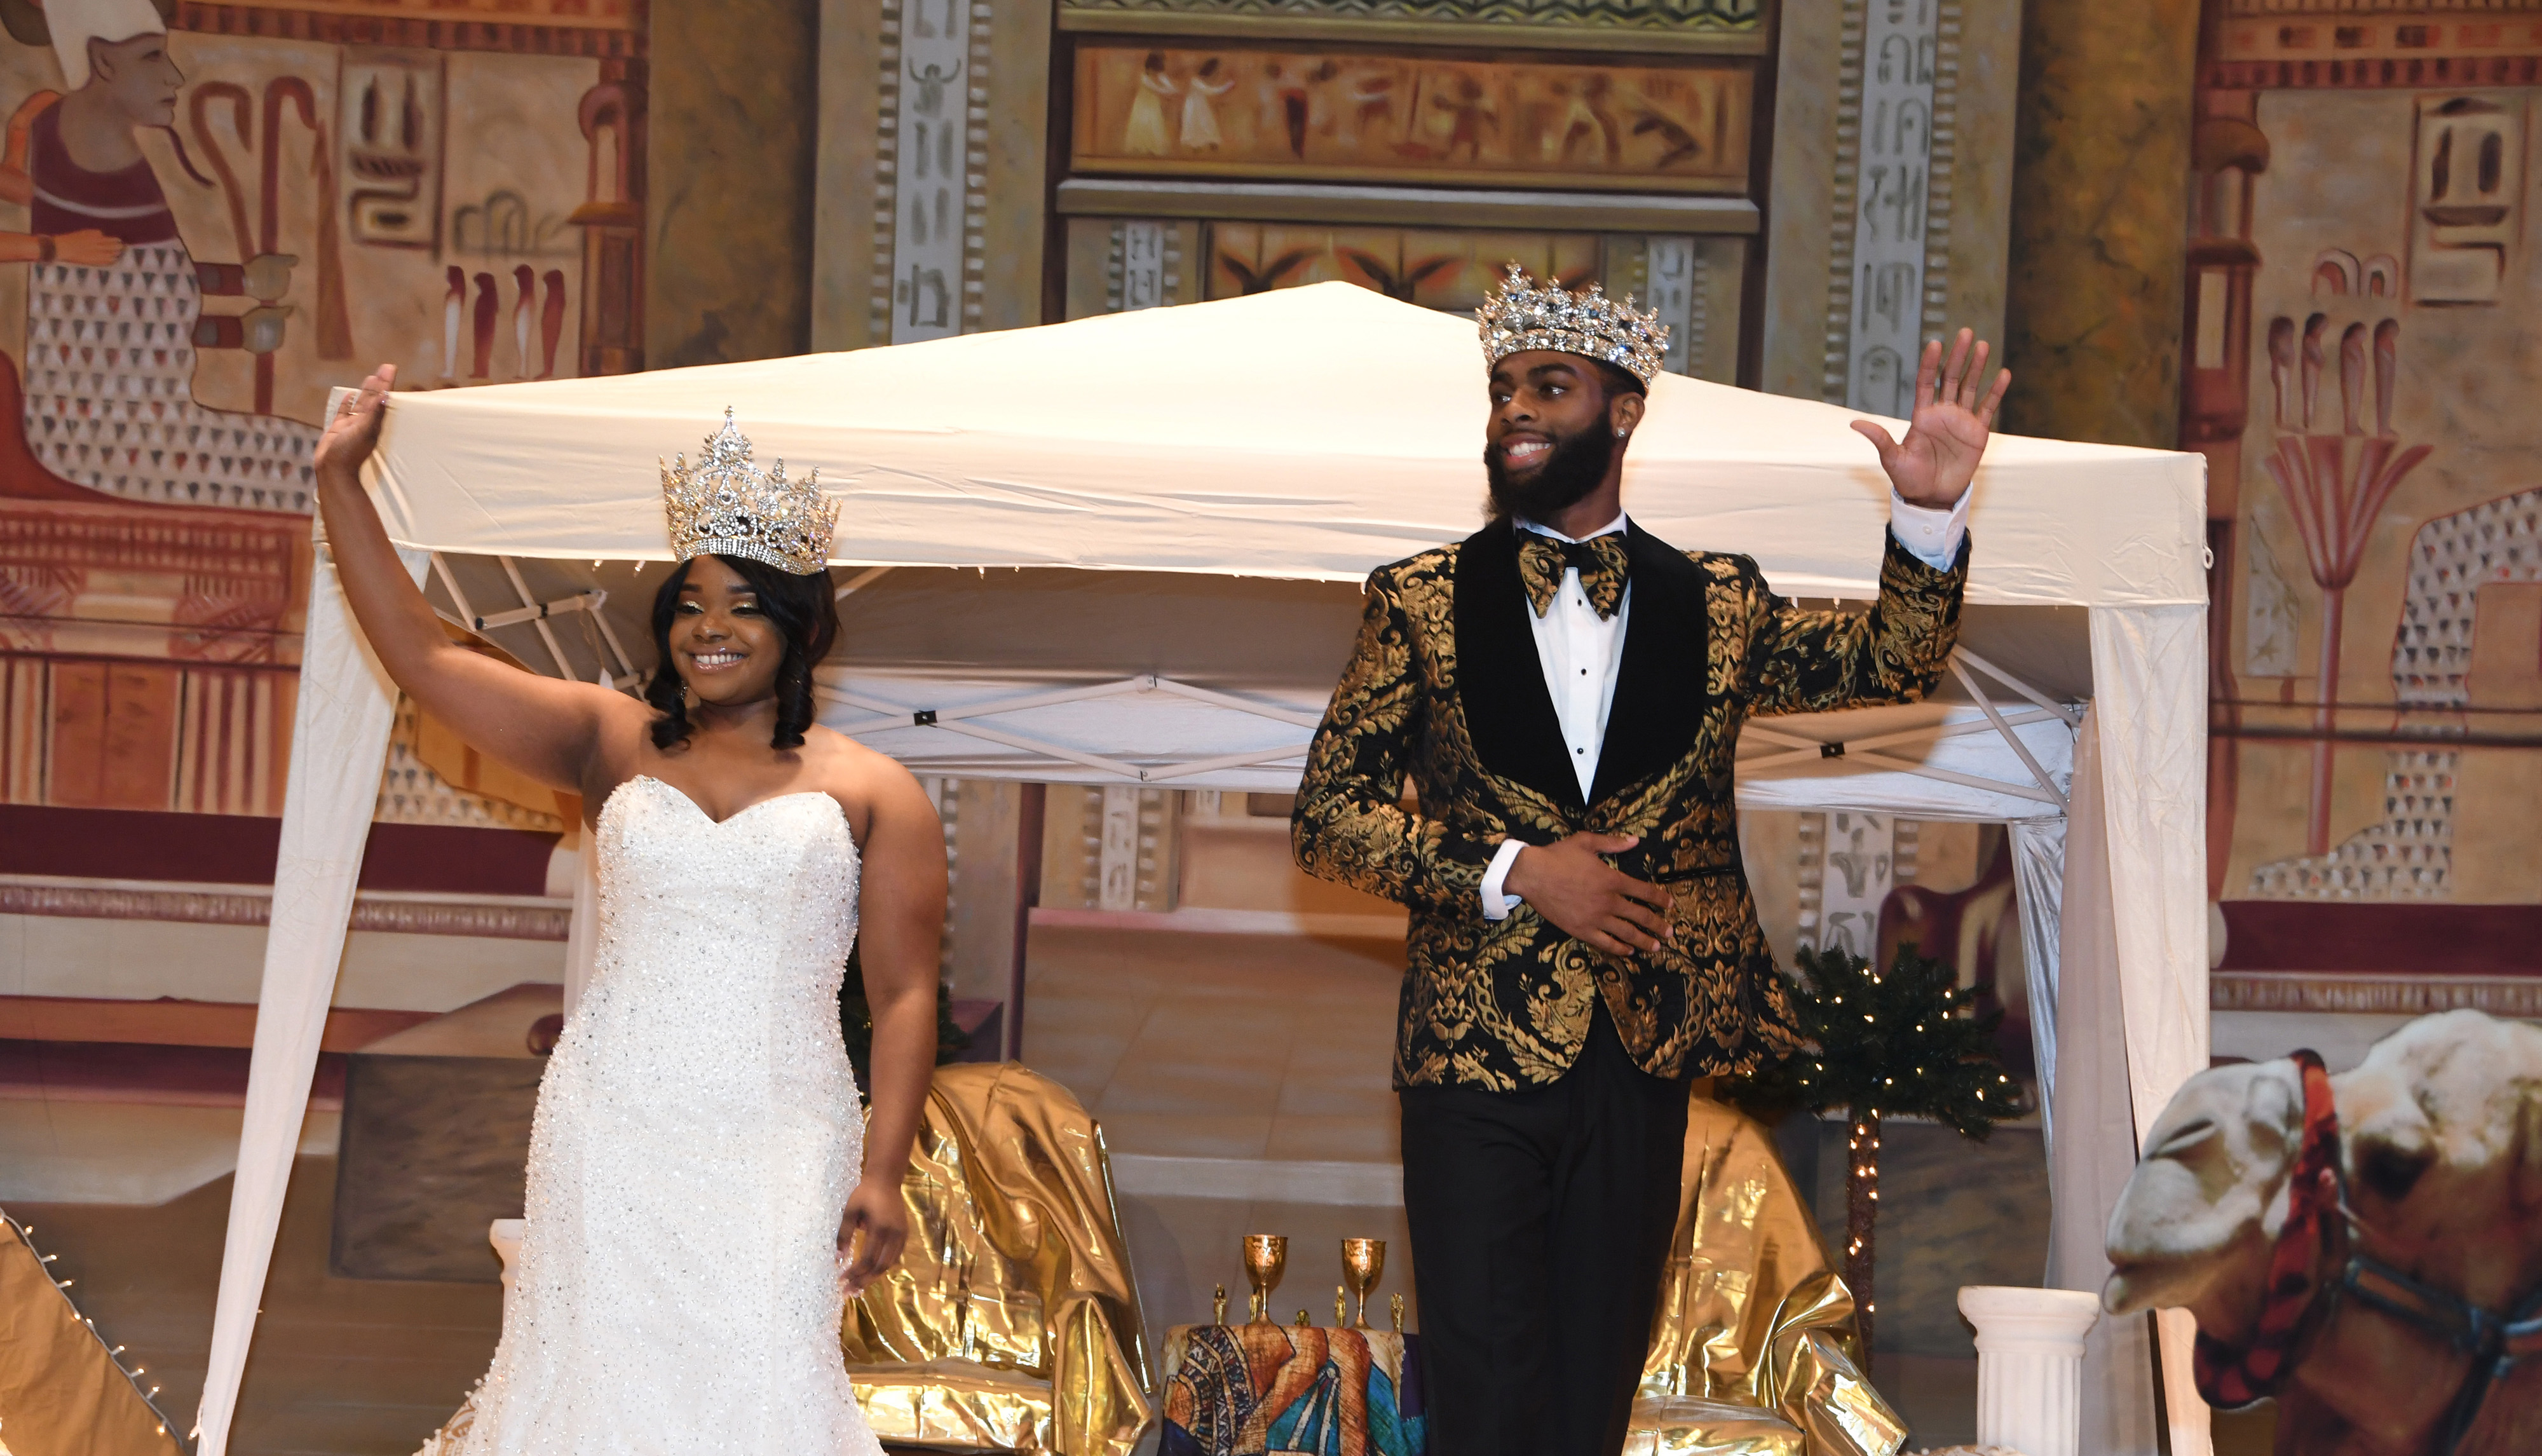 (L-r) The crowned Olivia Moncrieffe and Raphael Jason-Morgan soak up the love as they officially became Mr. and Miss Delaware State University during the Coronation Ceremony in the E&H Theatre.